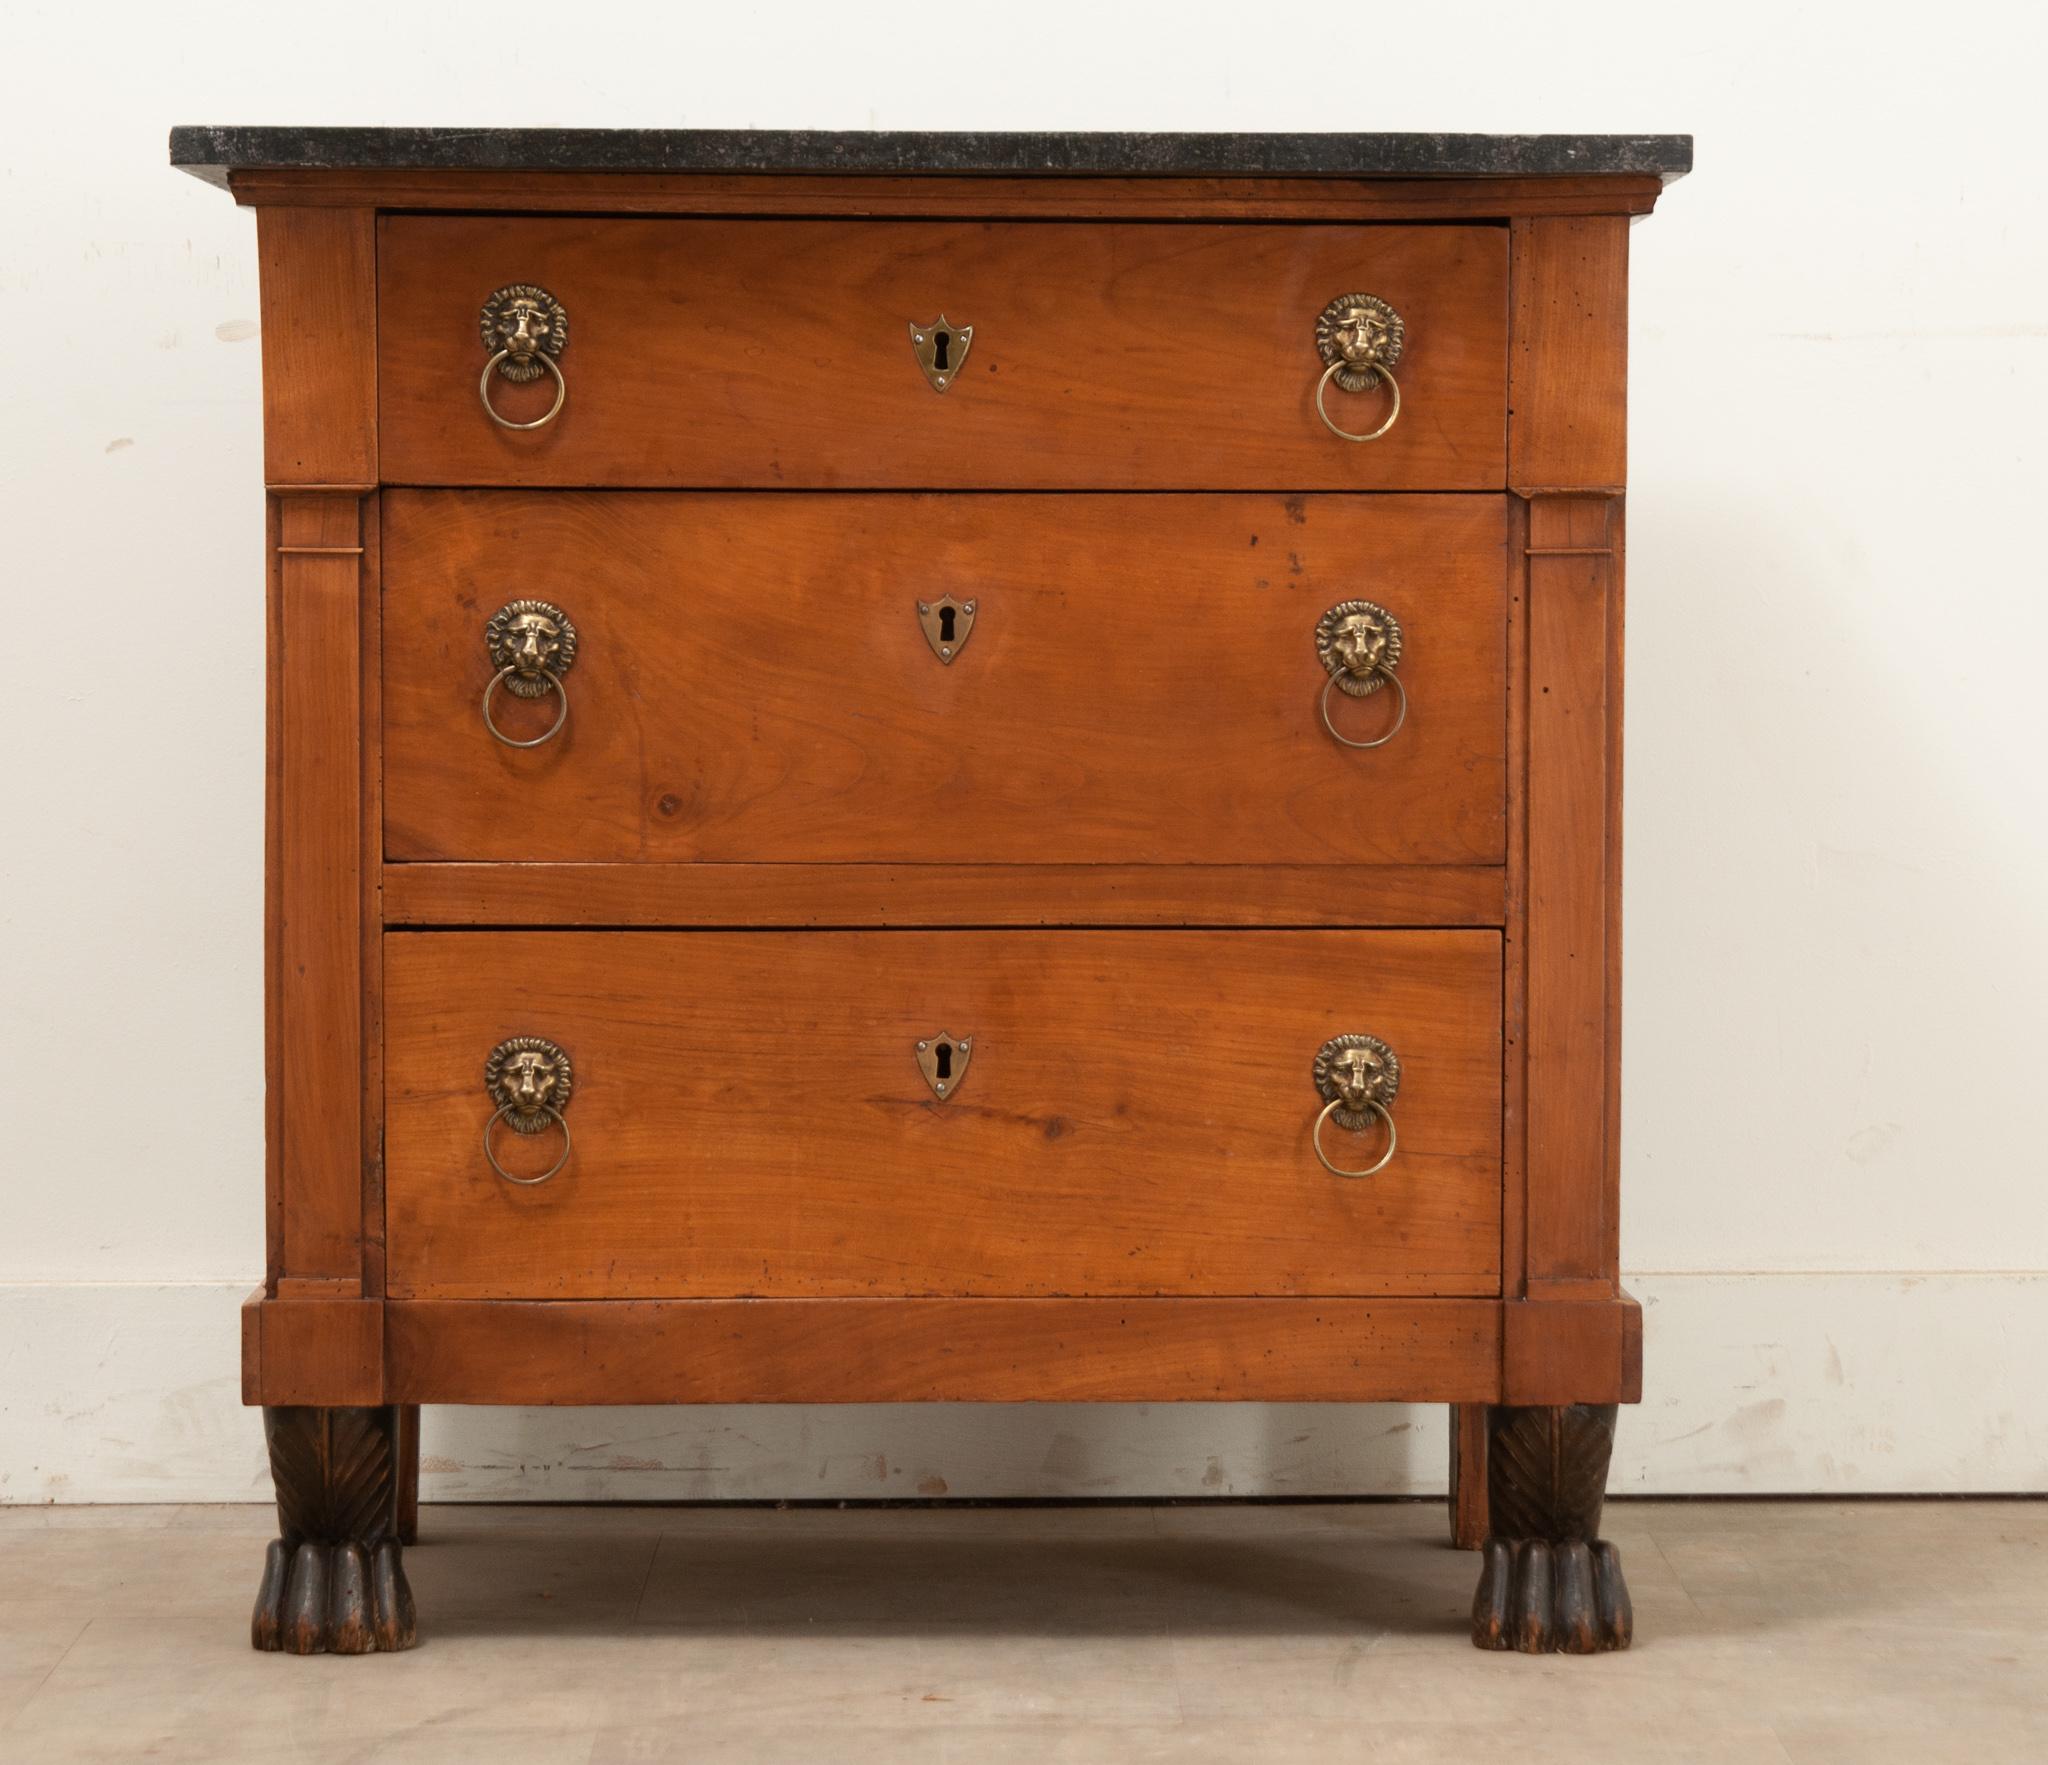 A petite French Empire commode made of mahogany, is topped with its original black fossil marble. Three easy-to-use drawers with brass lion head pulls are flanked by column form legs ending in ebonized paw feet. Cleaned and polished with a French